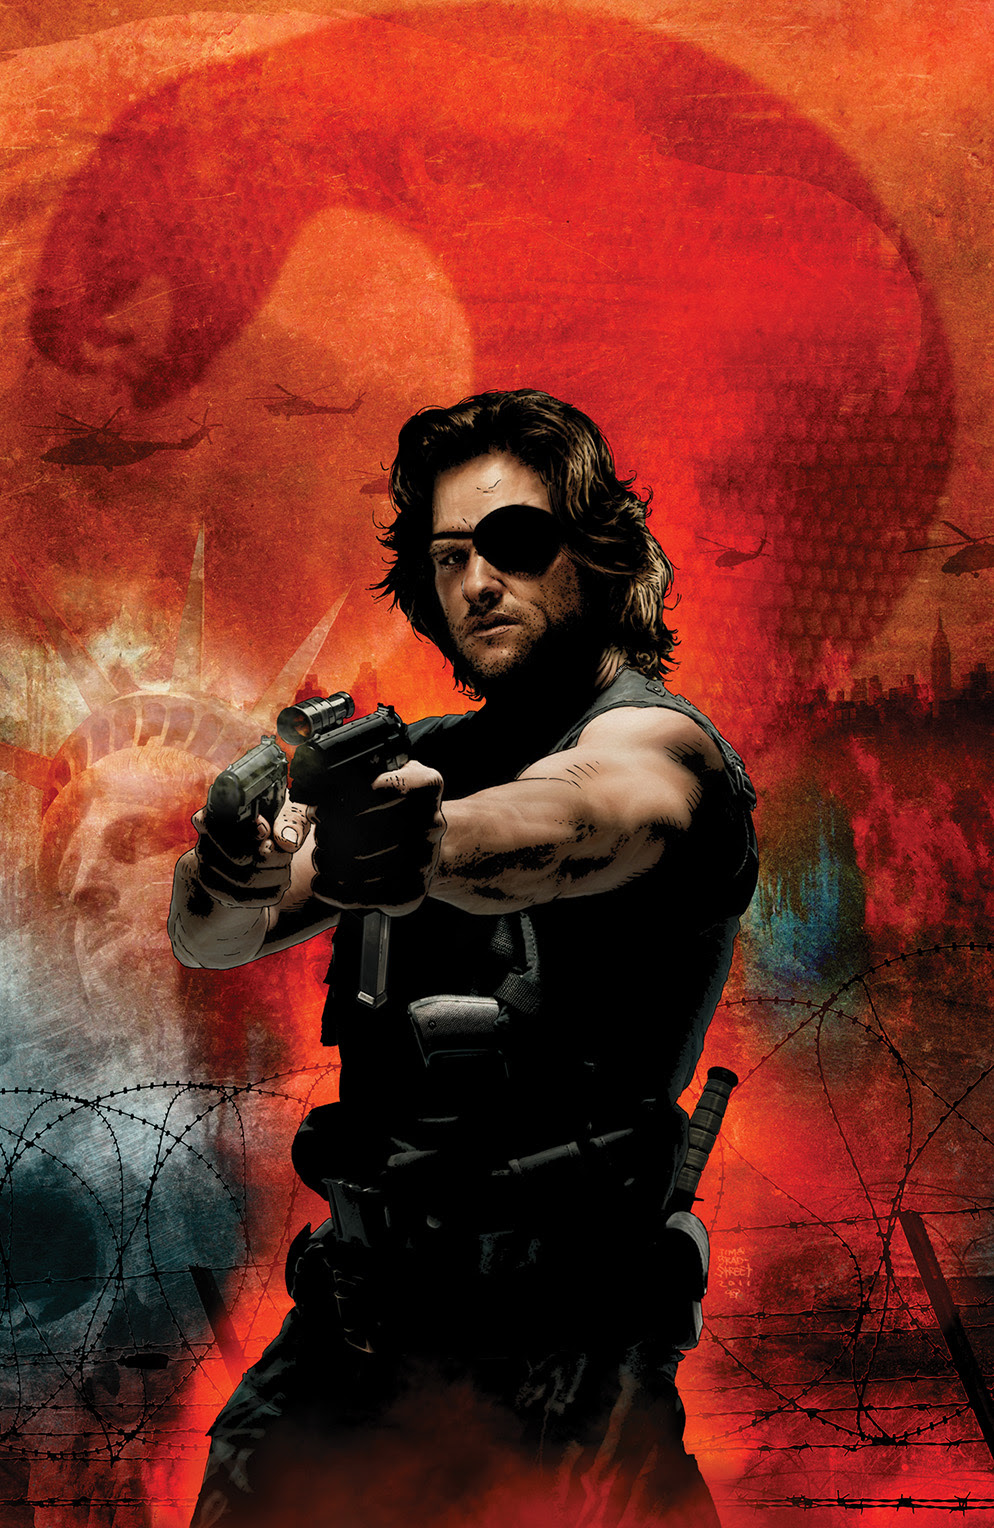 ESCAPE FROM NEW YORK #1 Retailer Incentive Cover (1:10) by Tim Bradstreet